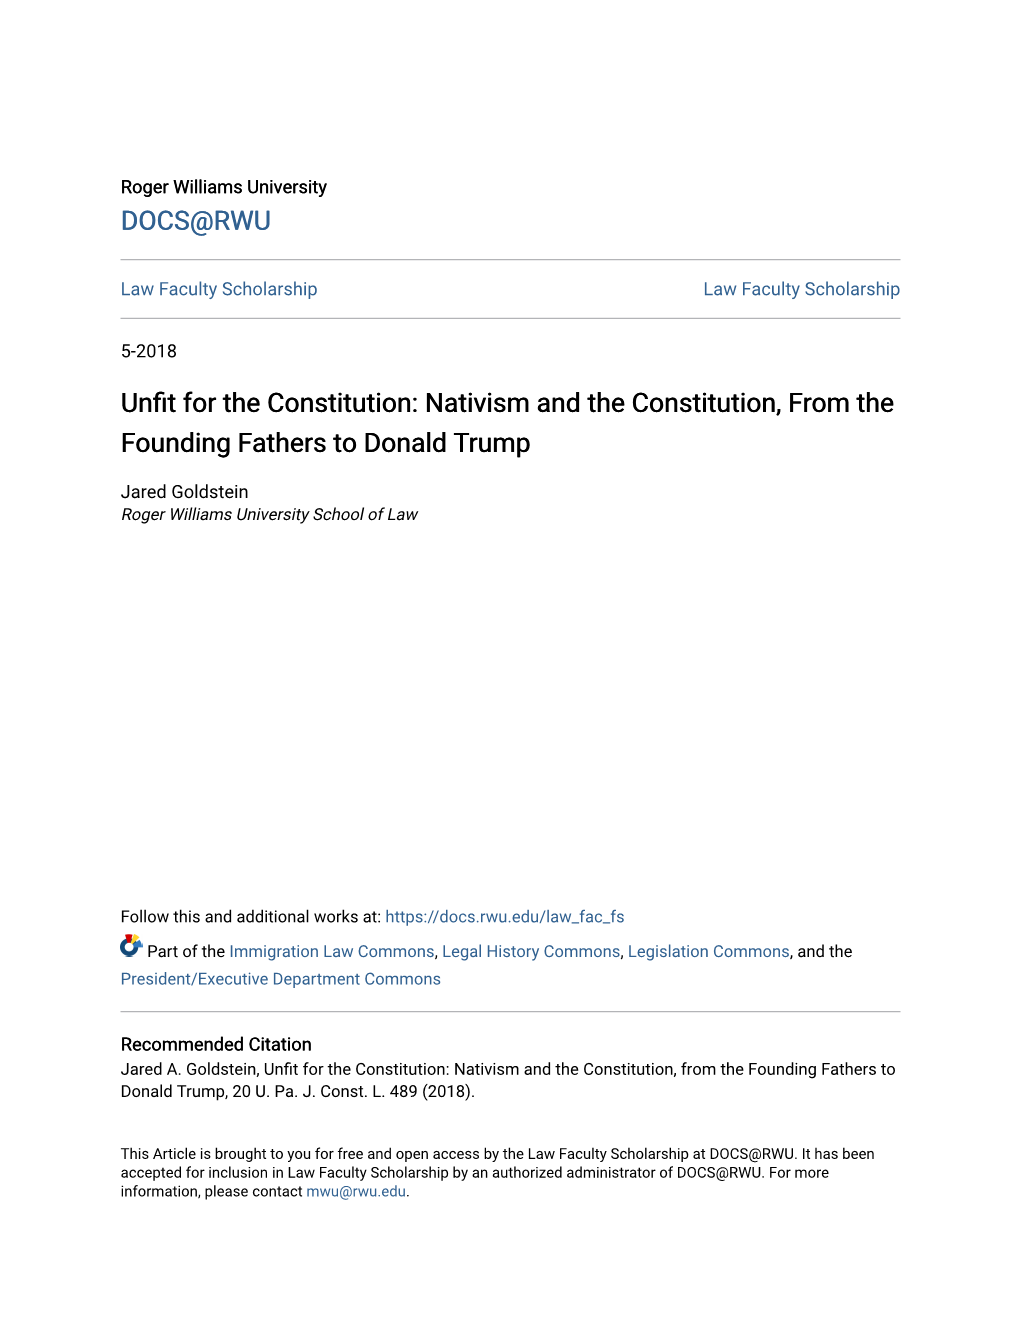 Nativism and the Constitution, from the Founding Fathers to Donald Trump, 20 U